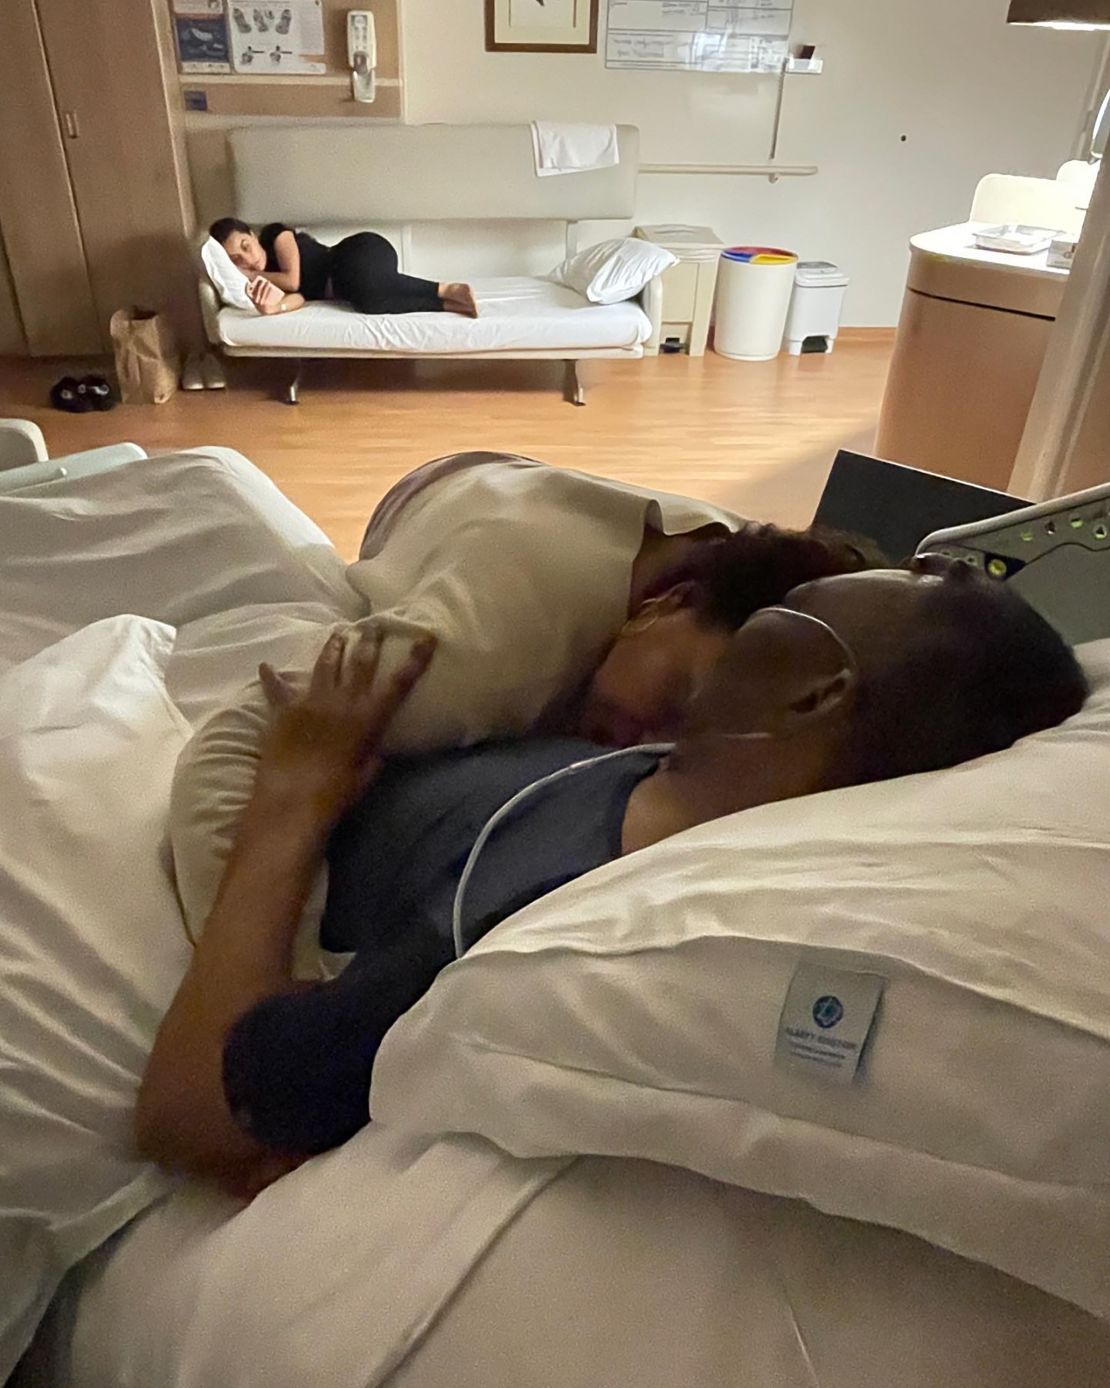 Before Christmas, Pele's daughter posted a moving photo with father in hospital.